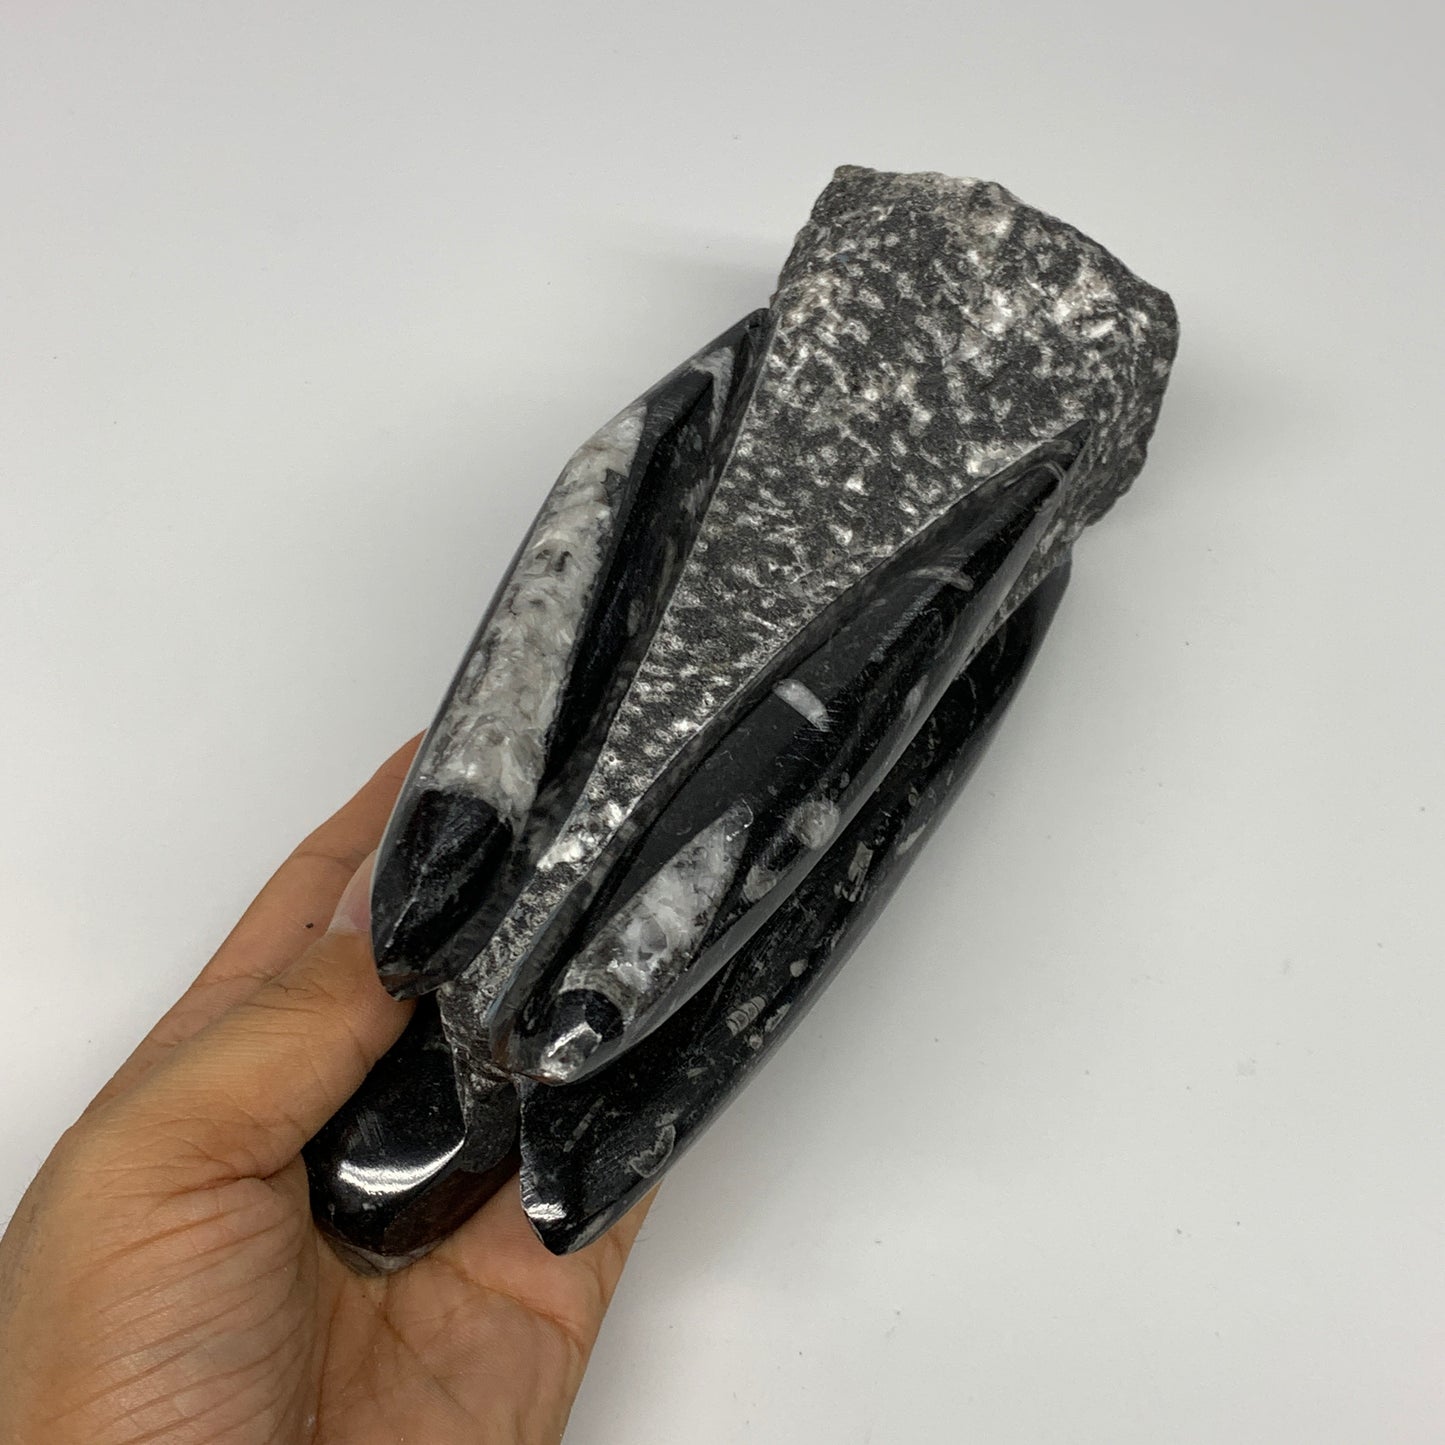 1325g, 7.5"x3.3"x3" Black Fossils Orthoceras Sculpture Tower @Morocco, B23412